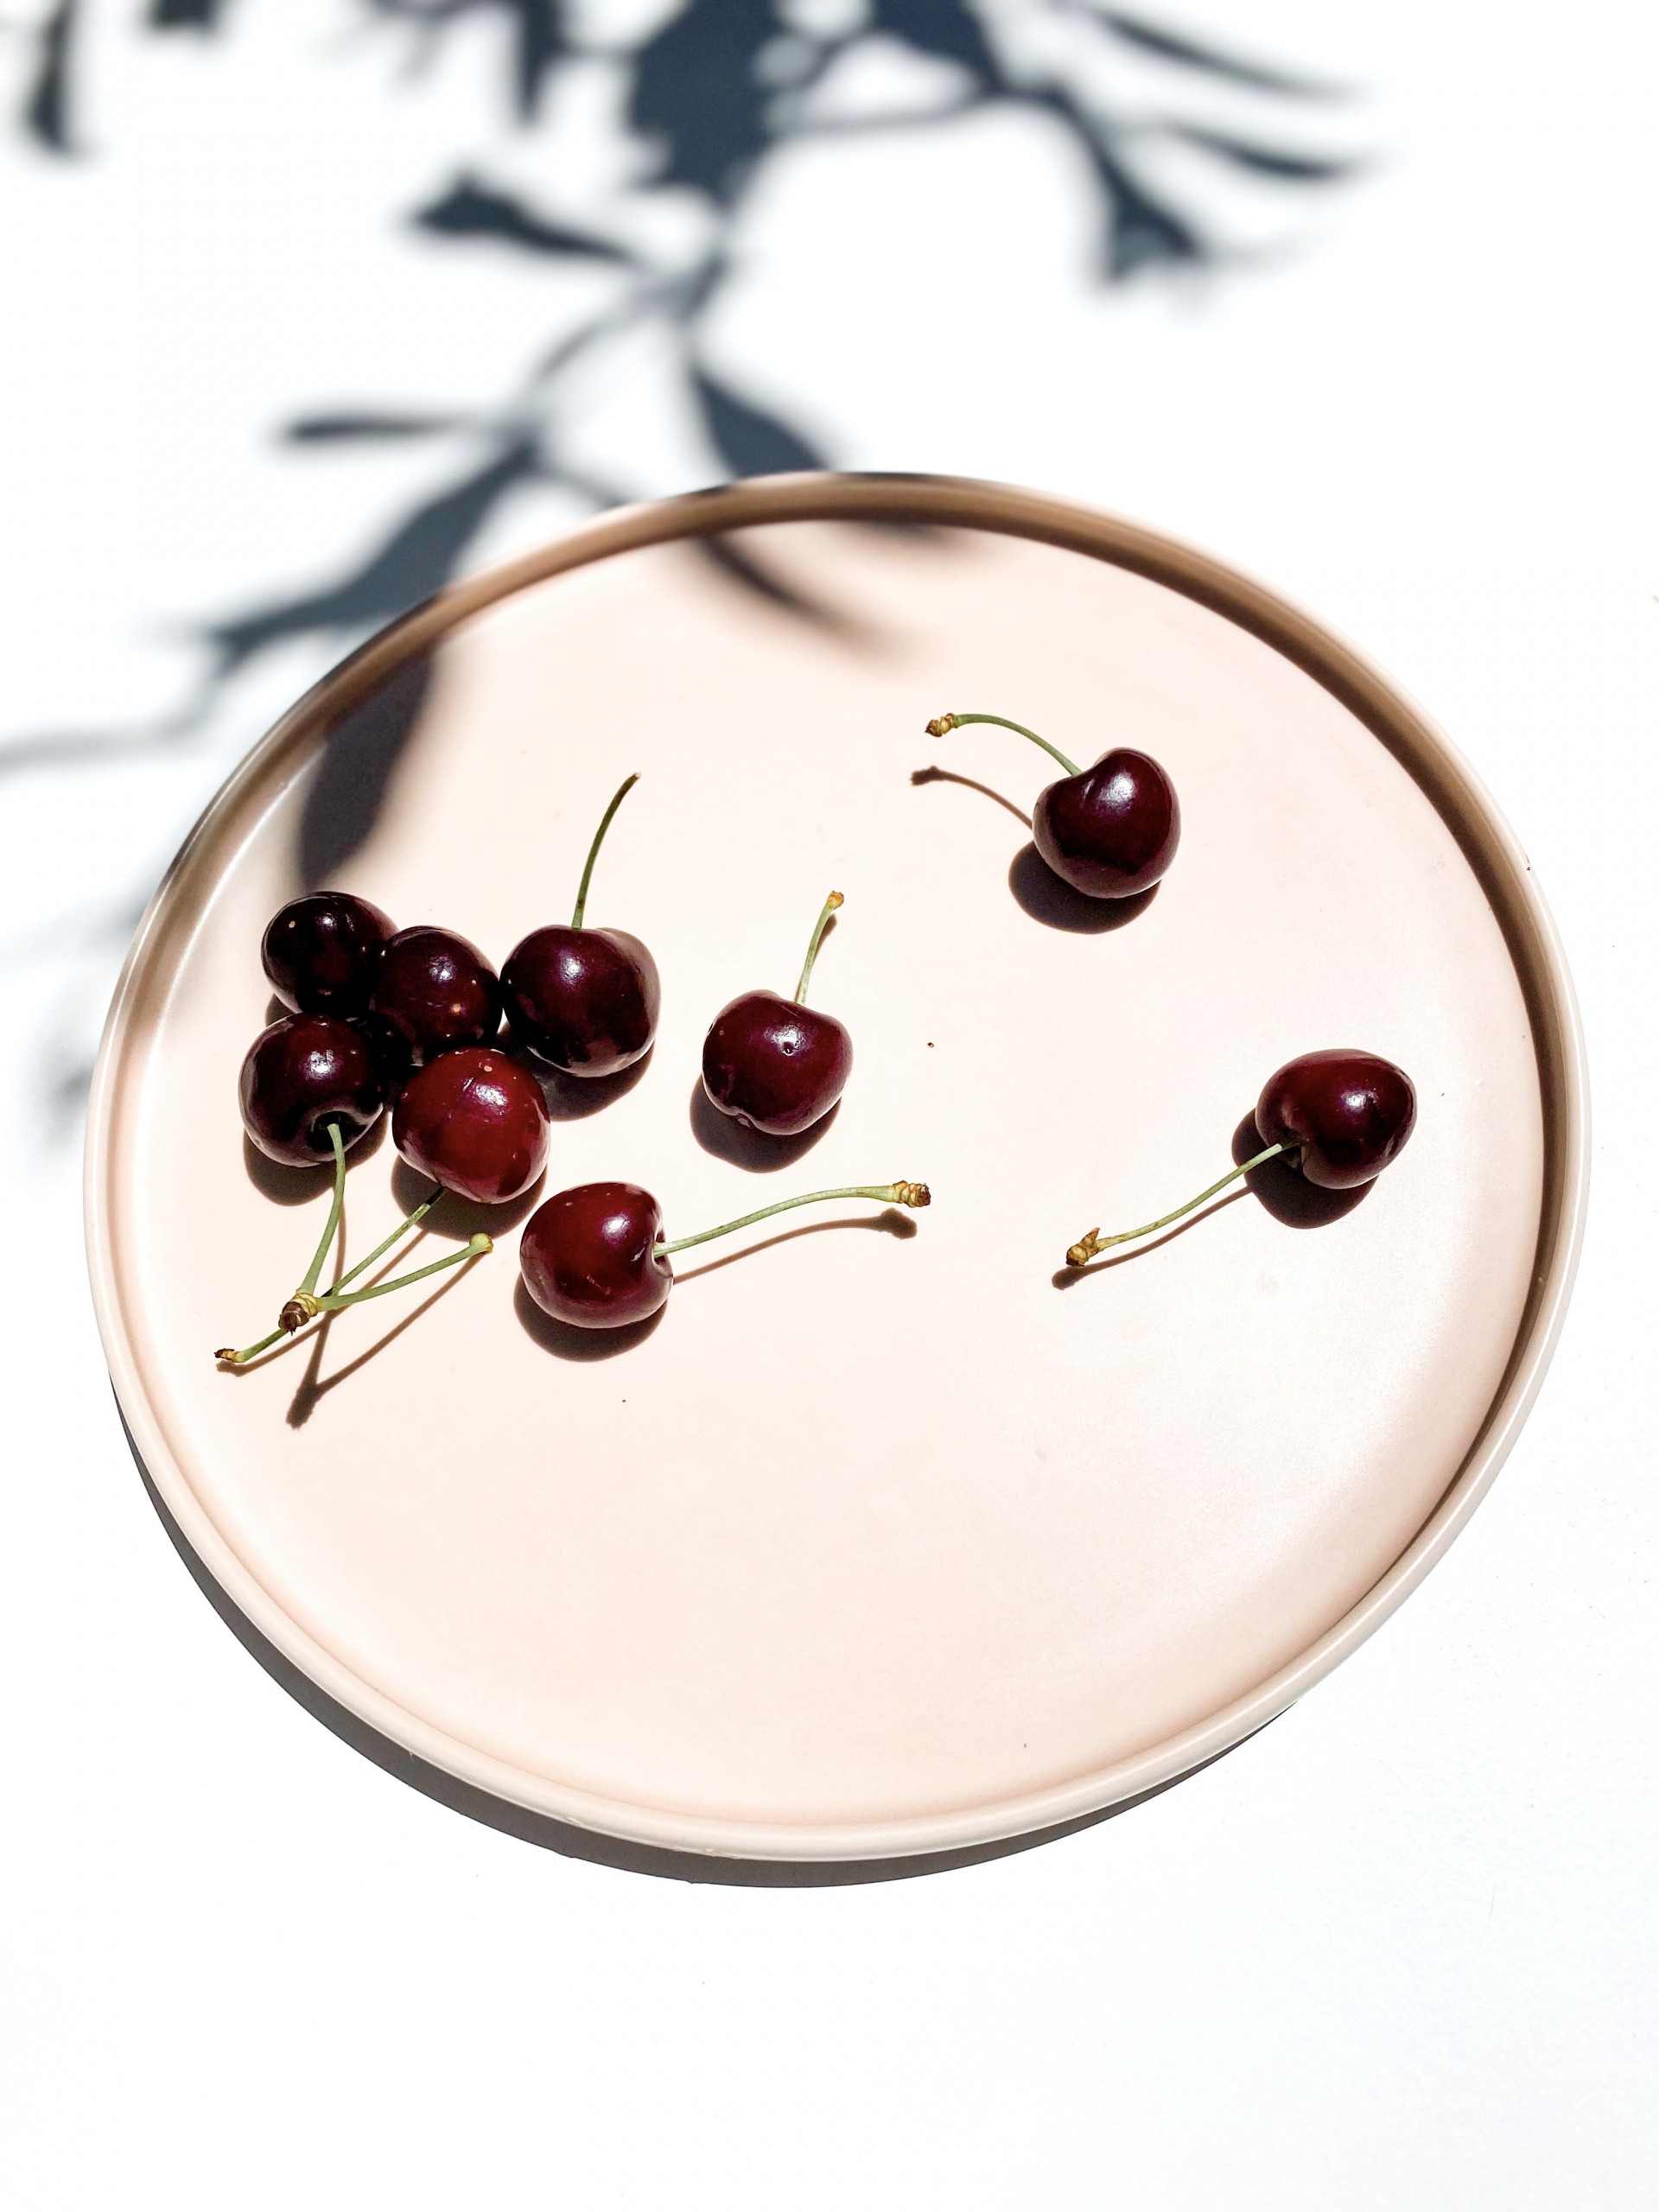 Several cherries sitting on a dish and ready to be eaten to promote restful sleep.